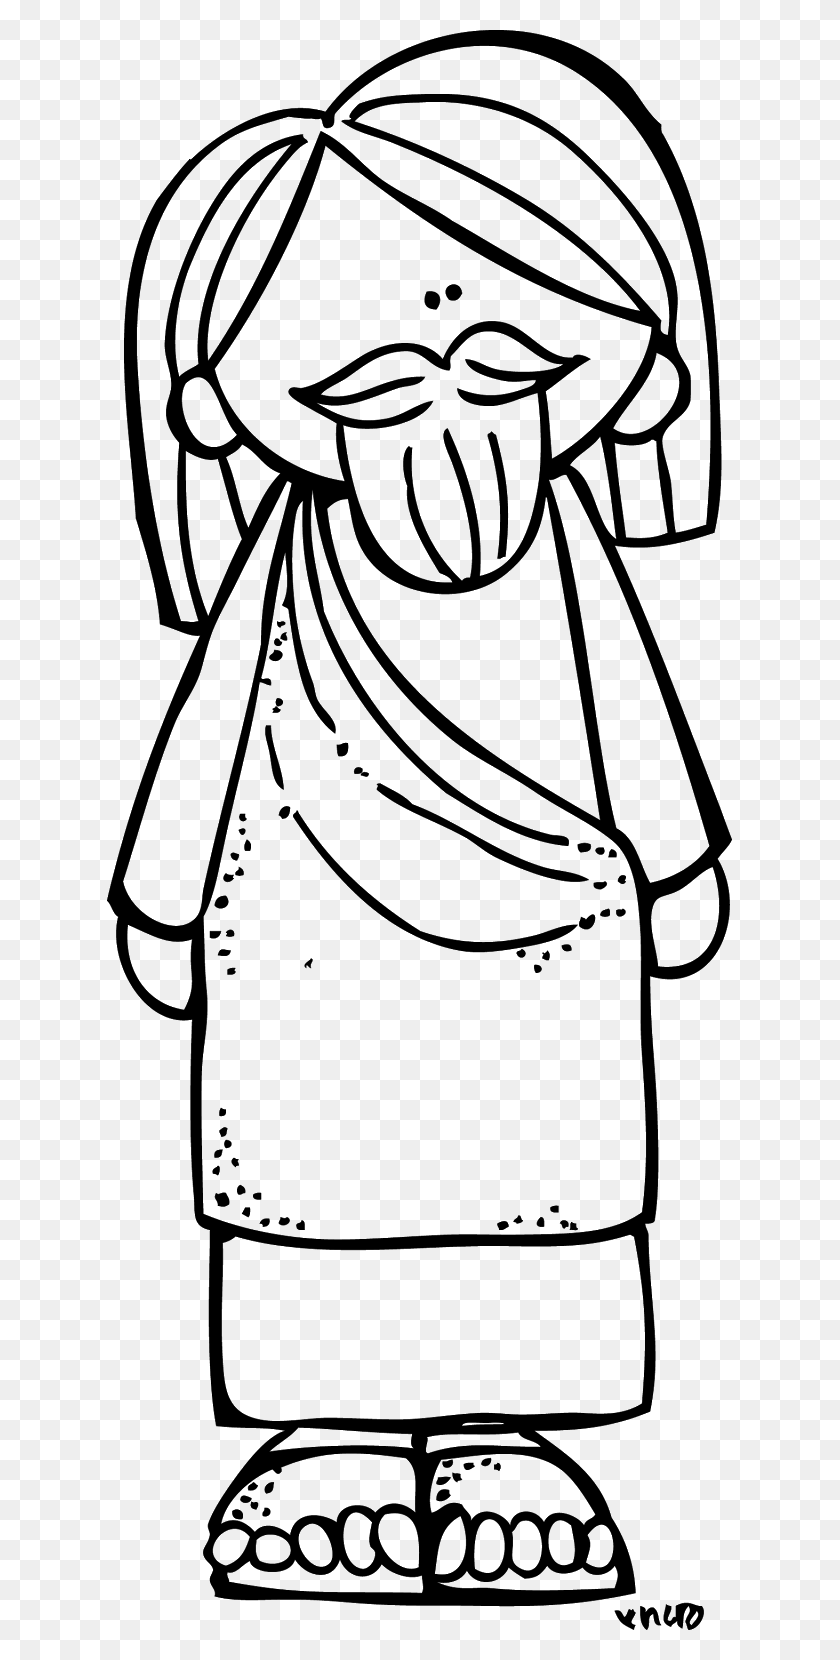 41 Coloring Pages Of Zacchaeus The Tax Collector  HD